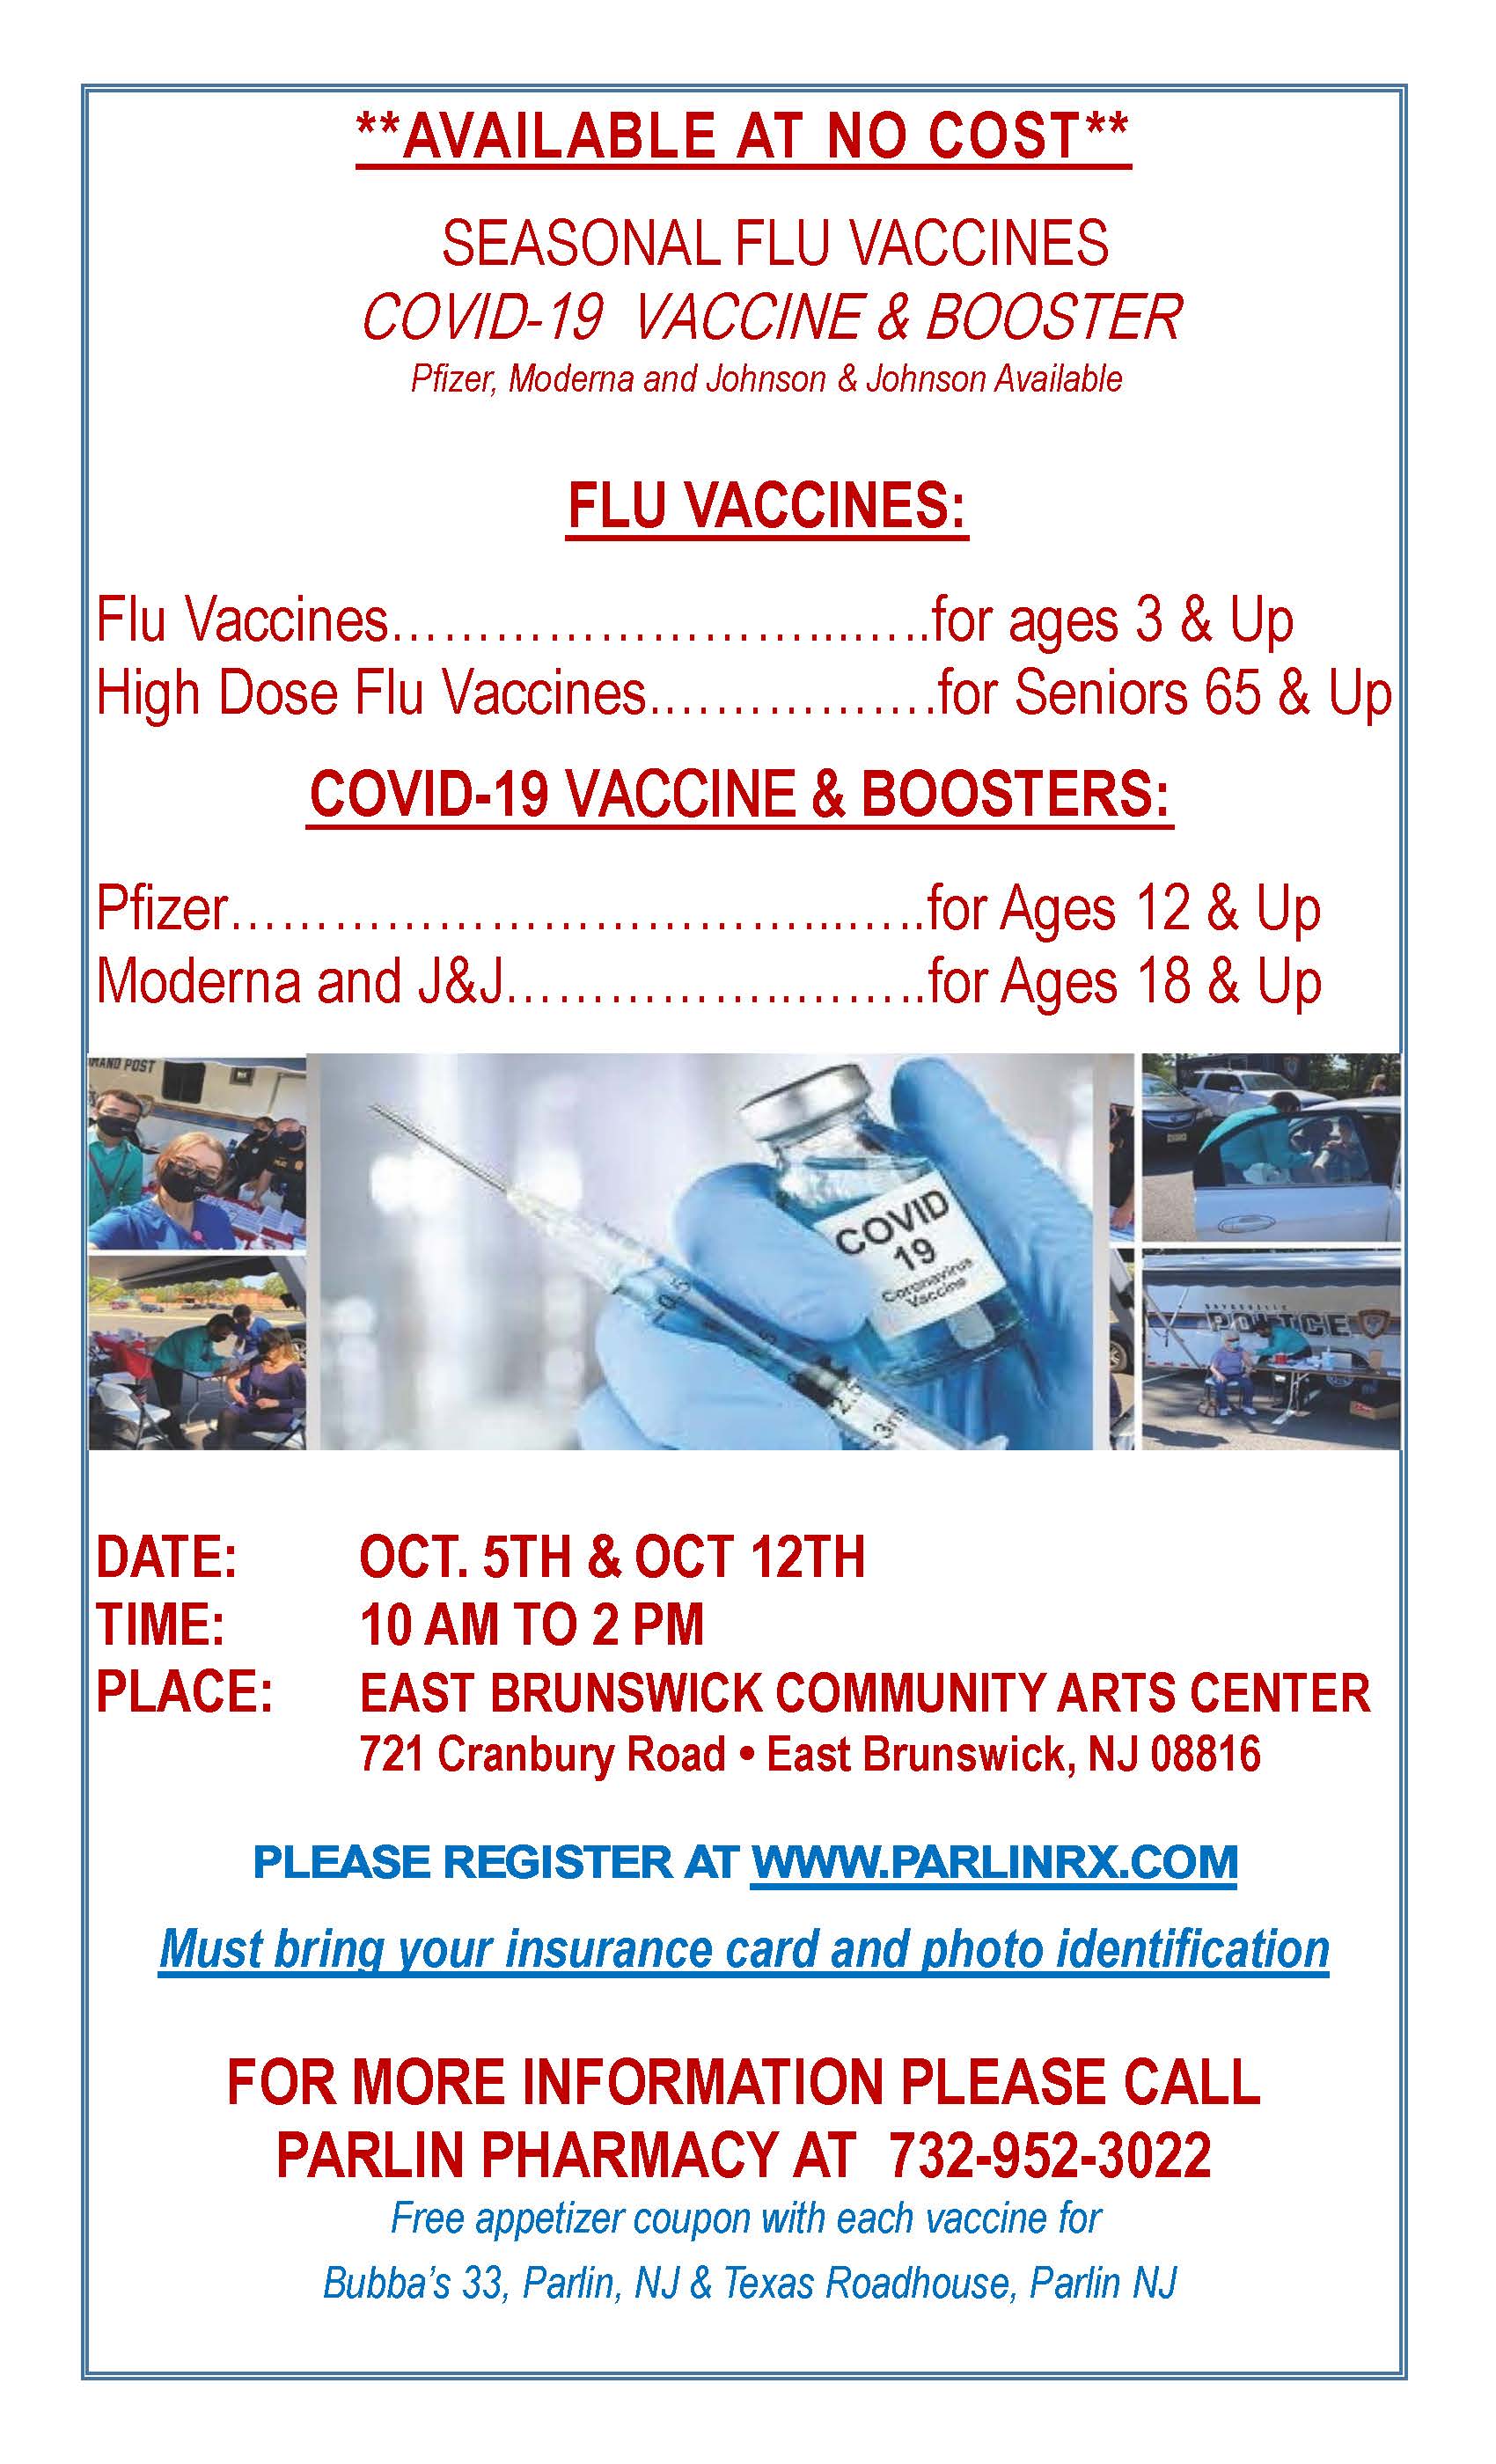 Flu and Covid Vaccines